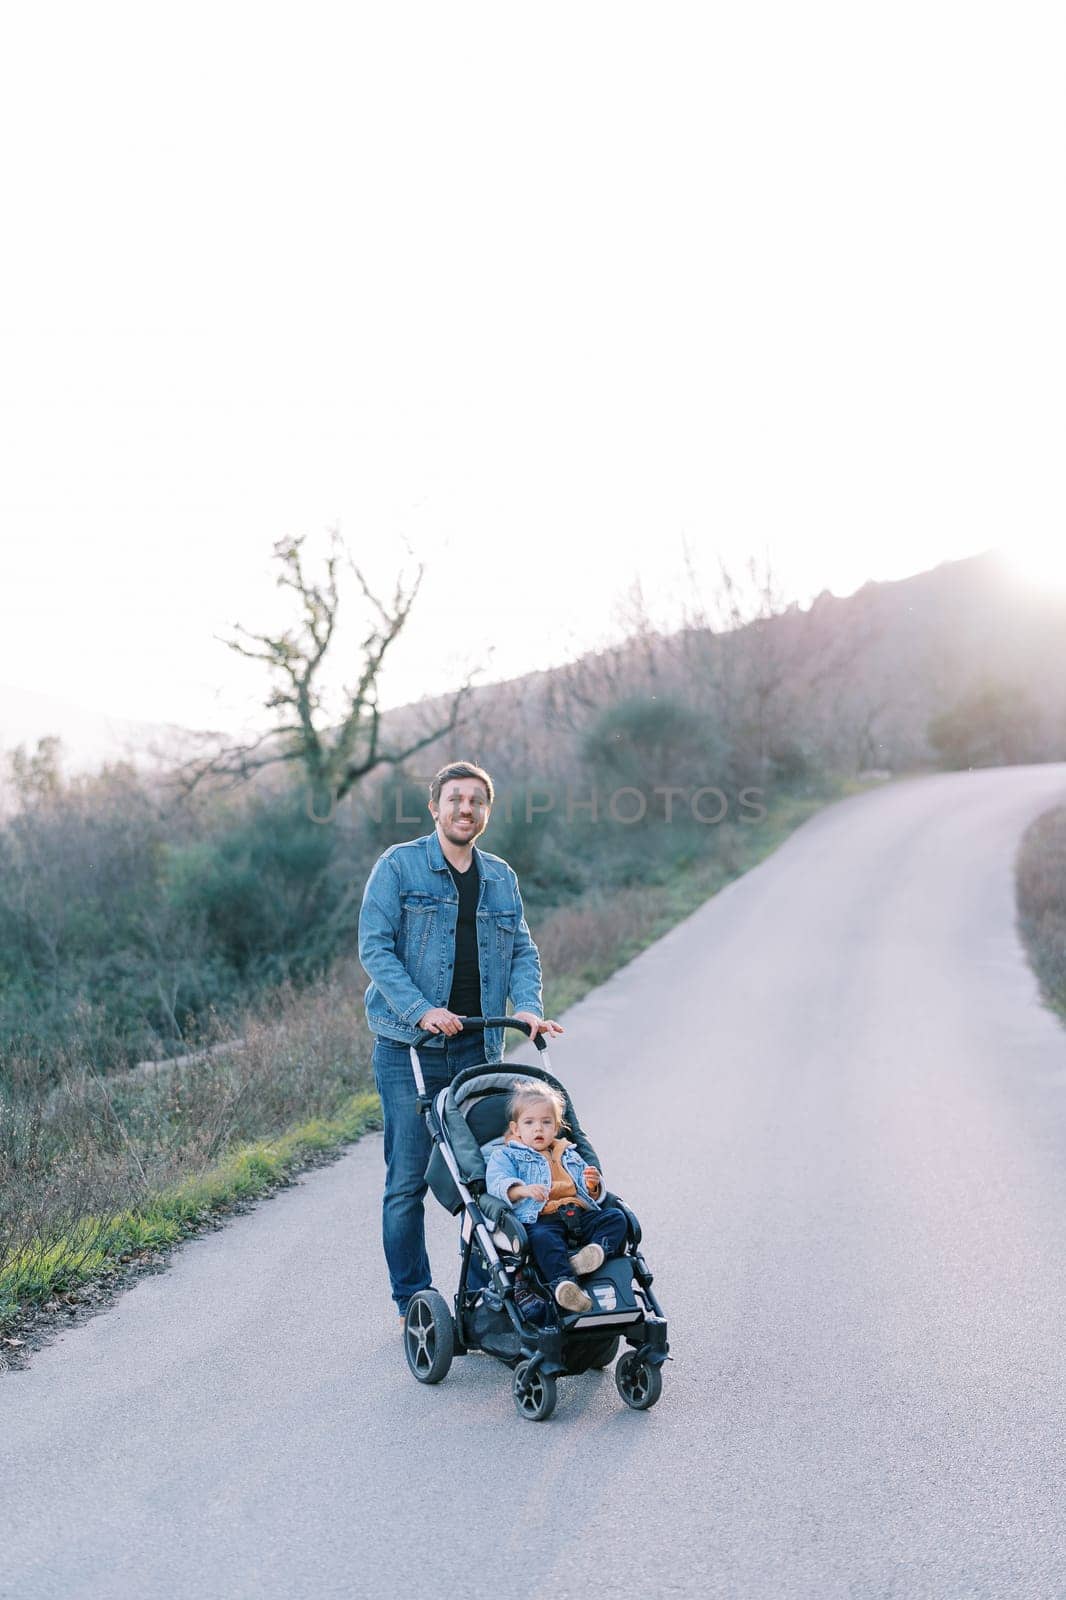 Smiling dad with a little girl in a stroller stands on an asphalt road in the mountains. High quality photo